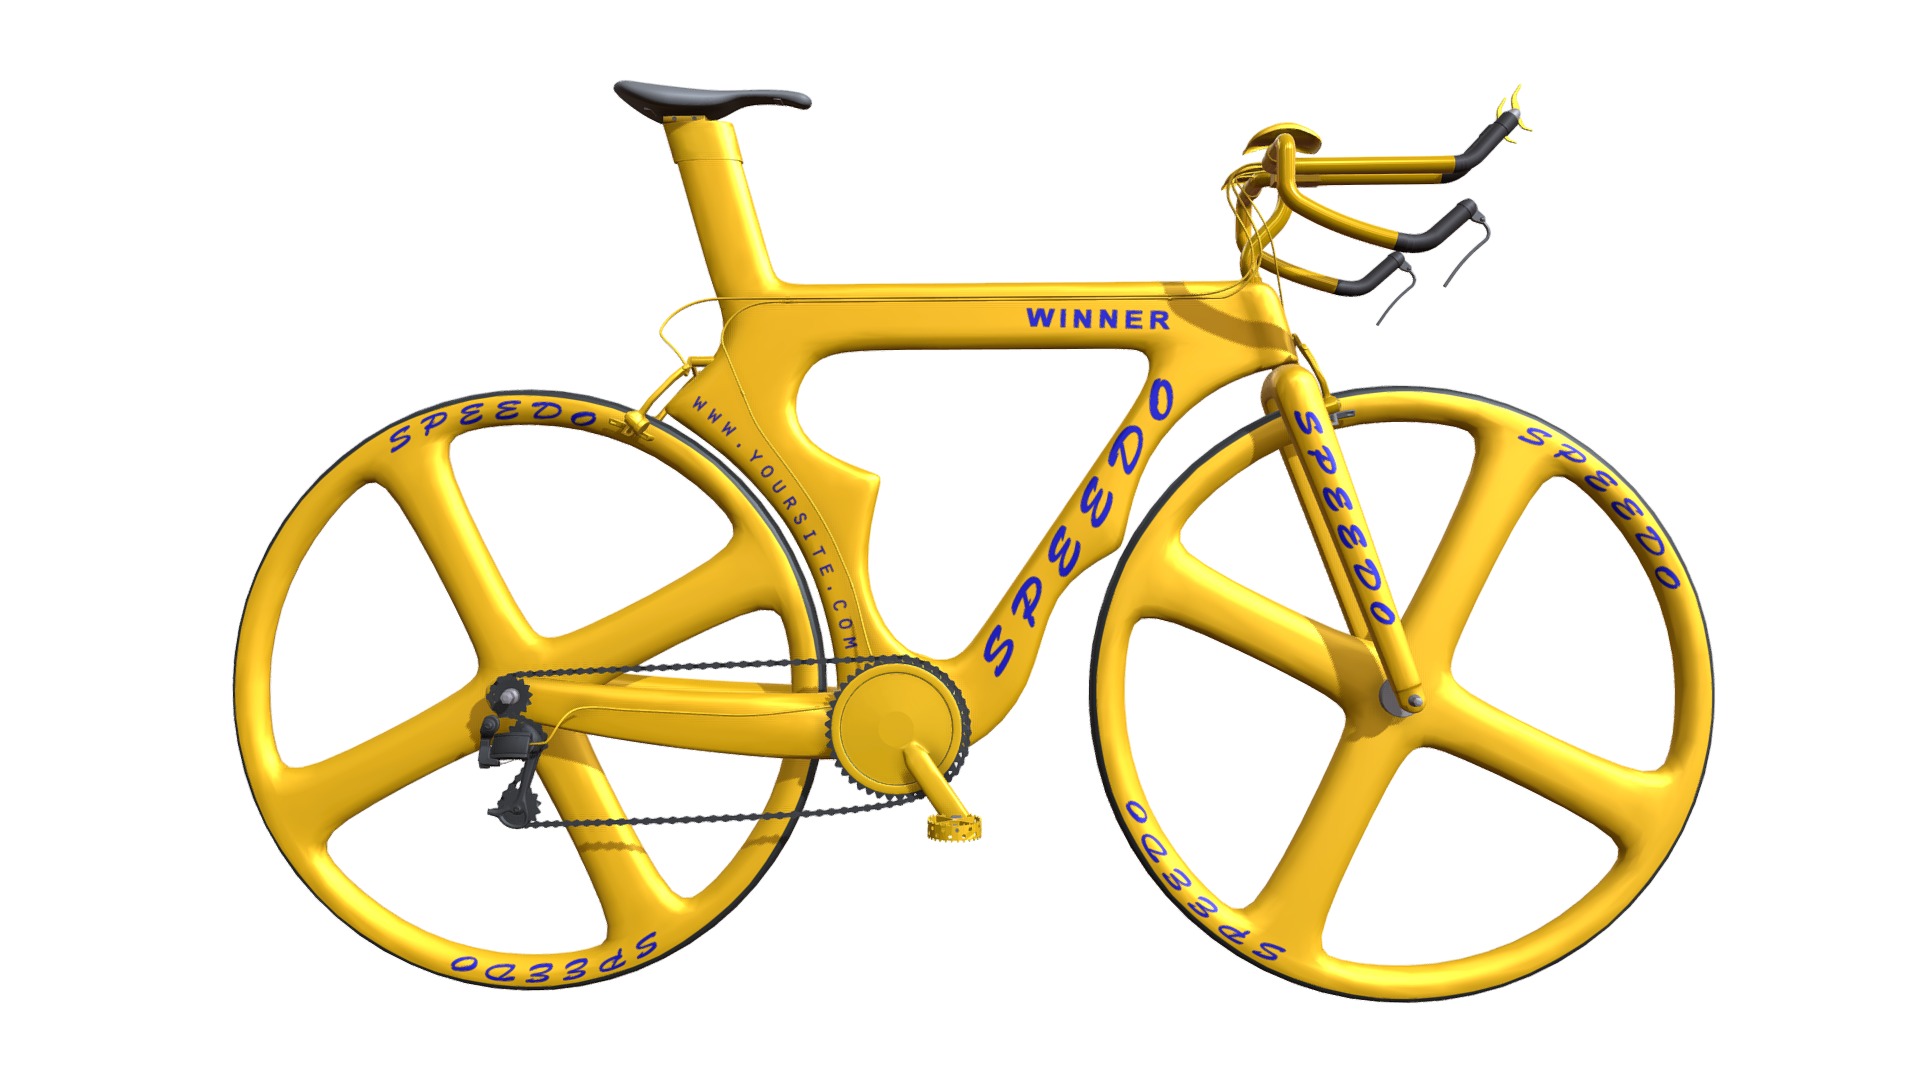 3D model Bike - This is a 3D model of the Bike. The 3D model is about a yellow and black bicycle.